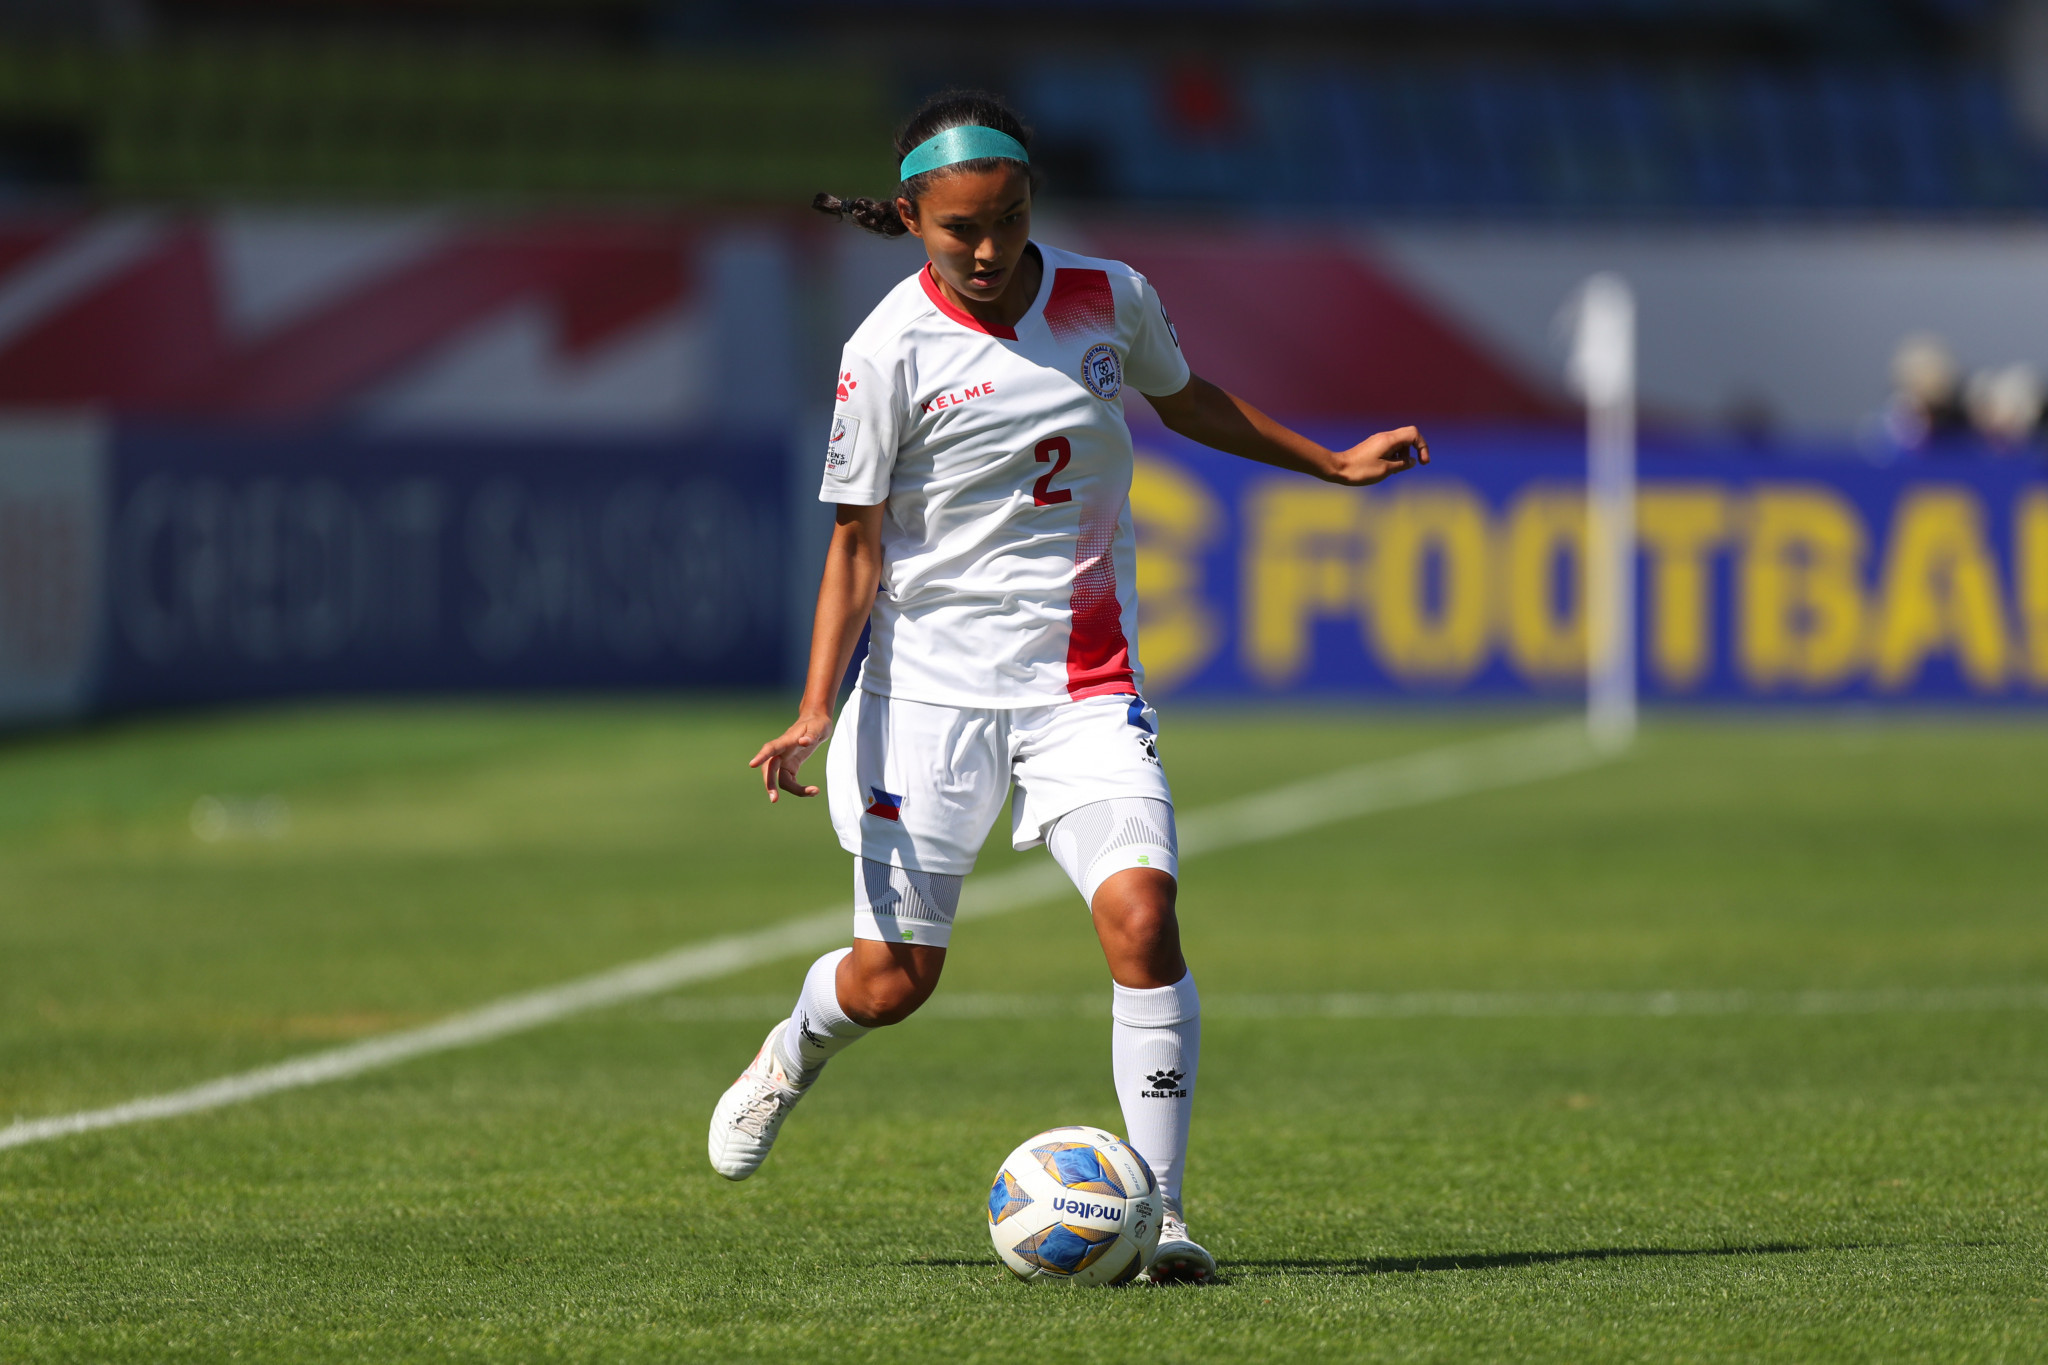 Philippines surge to top of group after big win over Singapore at AFF Women's Championship